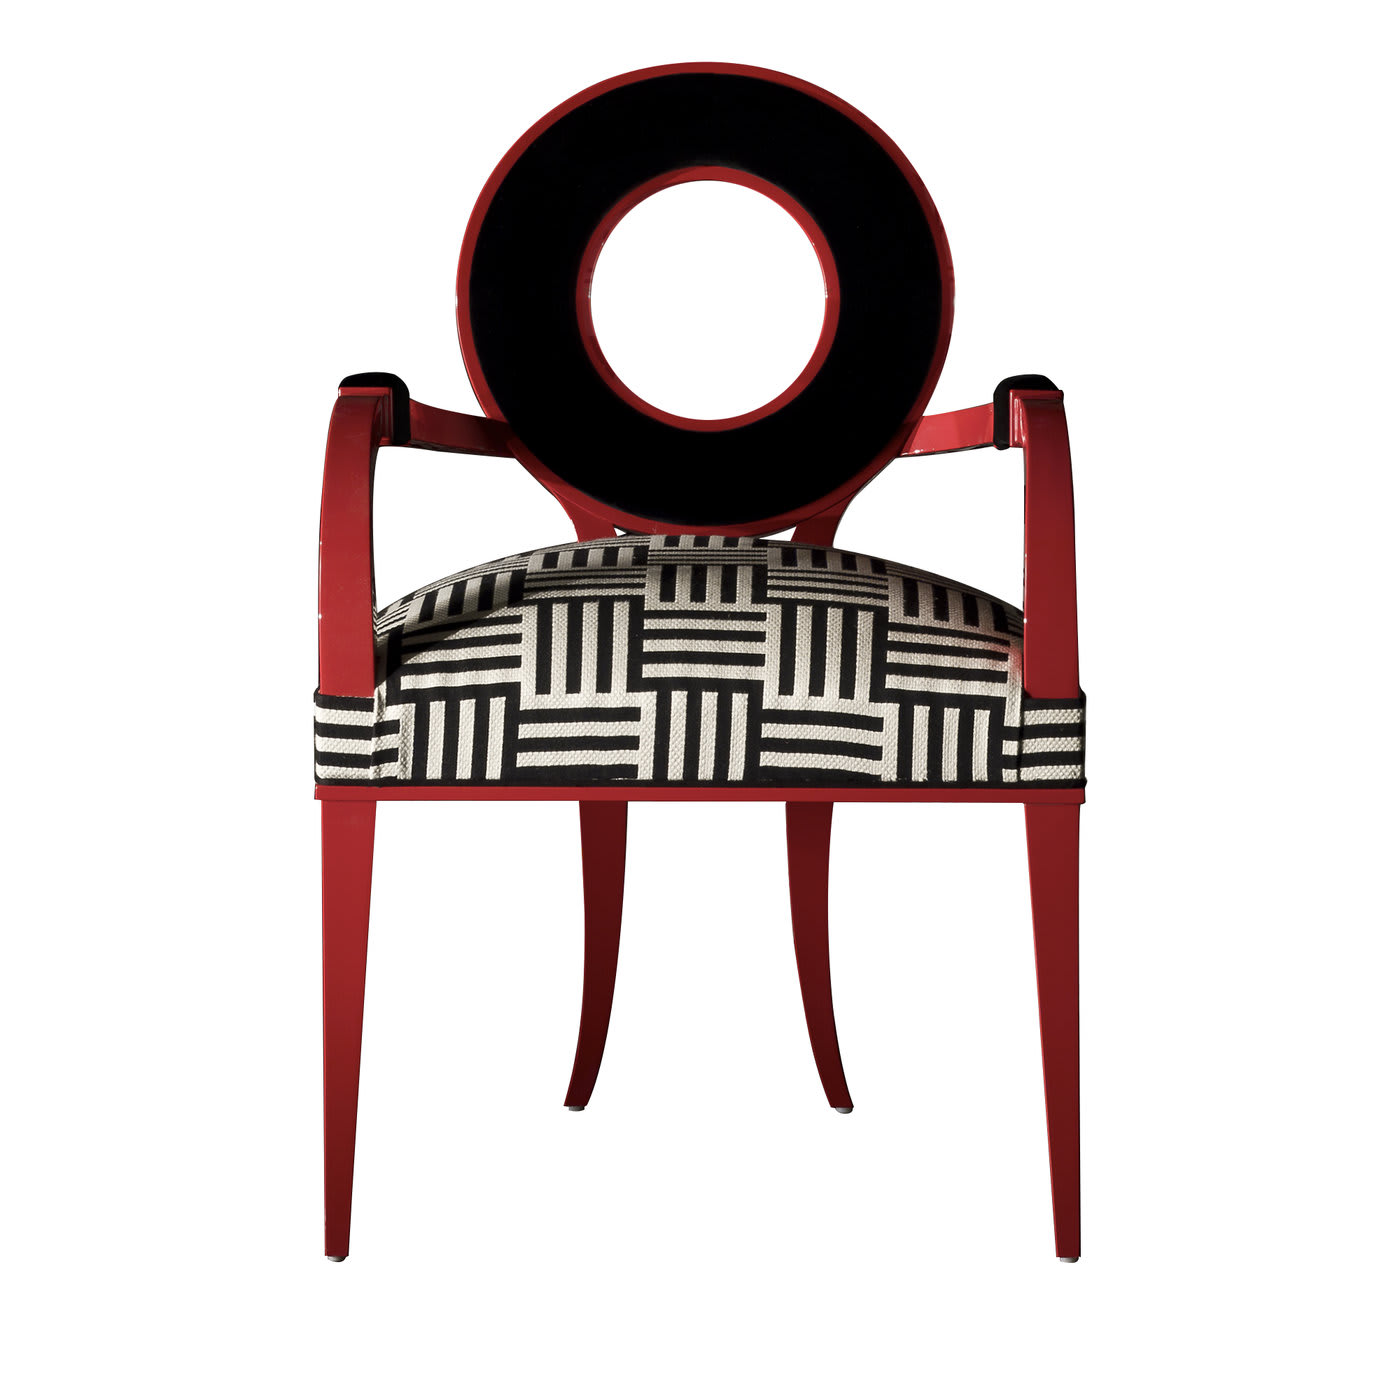 New Moon Red Chair - Extroverso